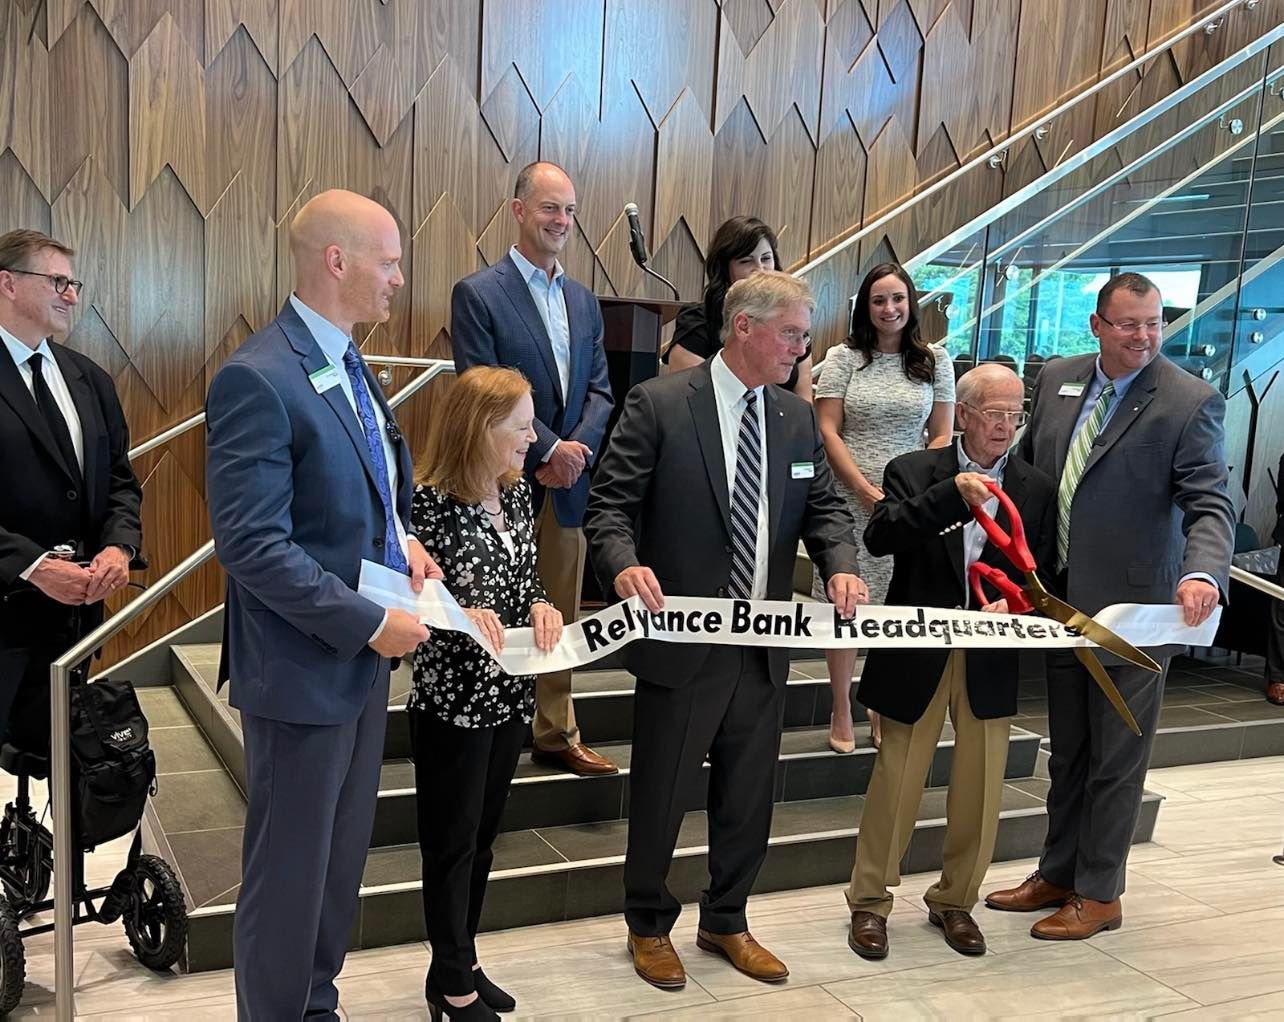 Ribbon cutting ceremony for new Relyance Bank HQ now open in White Hall, AR.